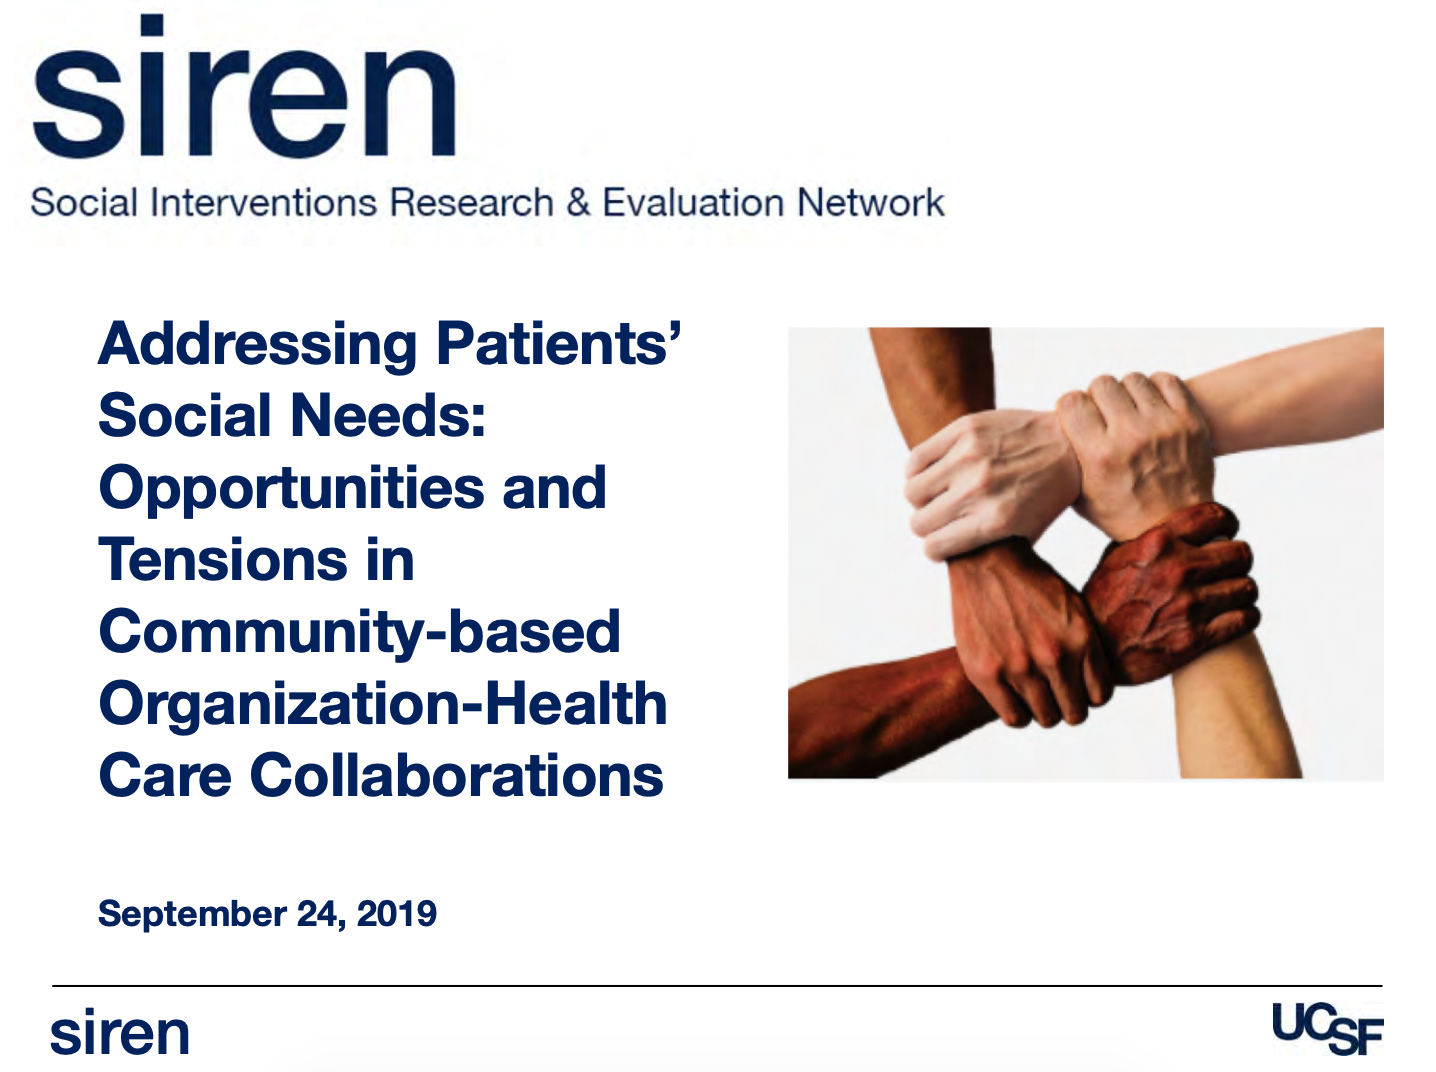 Addressing Patients' Social Needs: Opportunities and Tensions in Community-based Organization-Health Care Collaborations